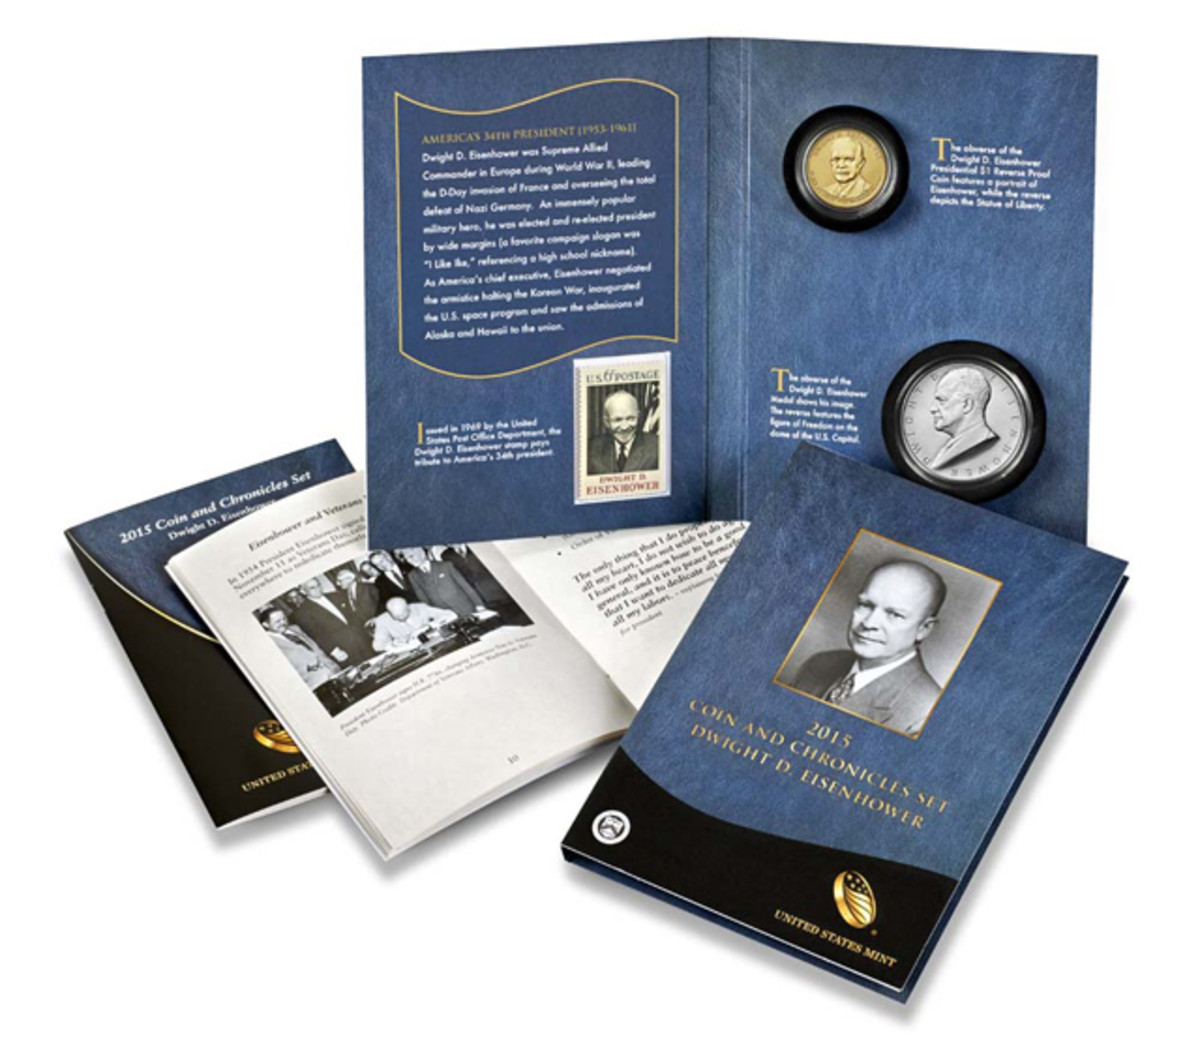 The Eisenhower Coin and Chronicles set went on sale Aug. 11 to a quick sellout and website issues.